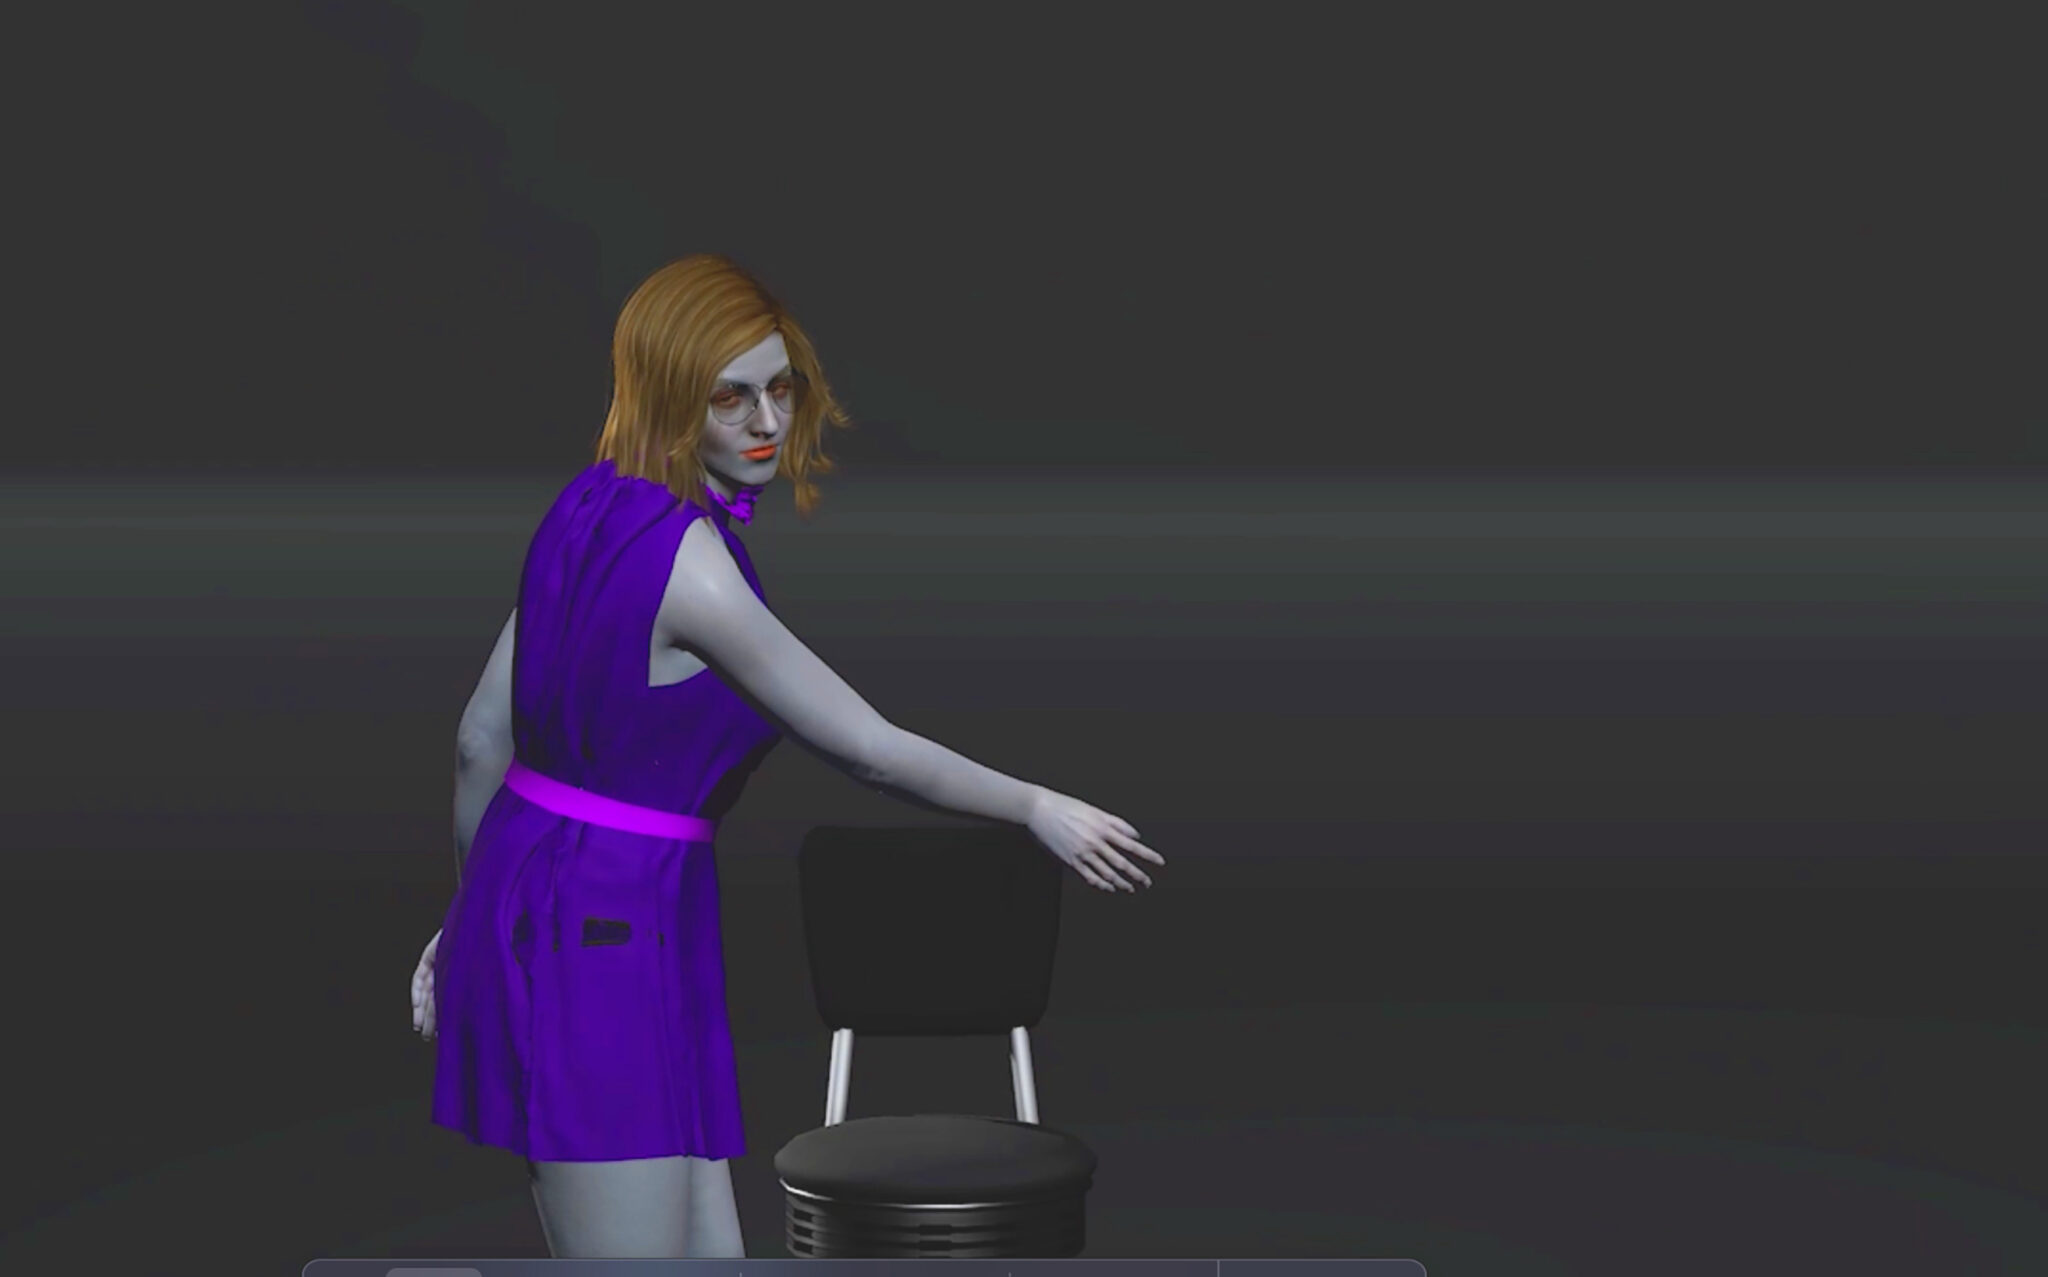 A still from a film shows a digital avatar, a woman with light grey skin, mid-length, shoulder length light brown hair dancing around a black chair in a dark gray space. She wears a royal purple sleeveless, short dress.